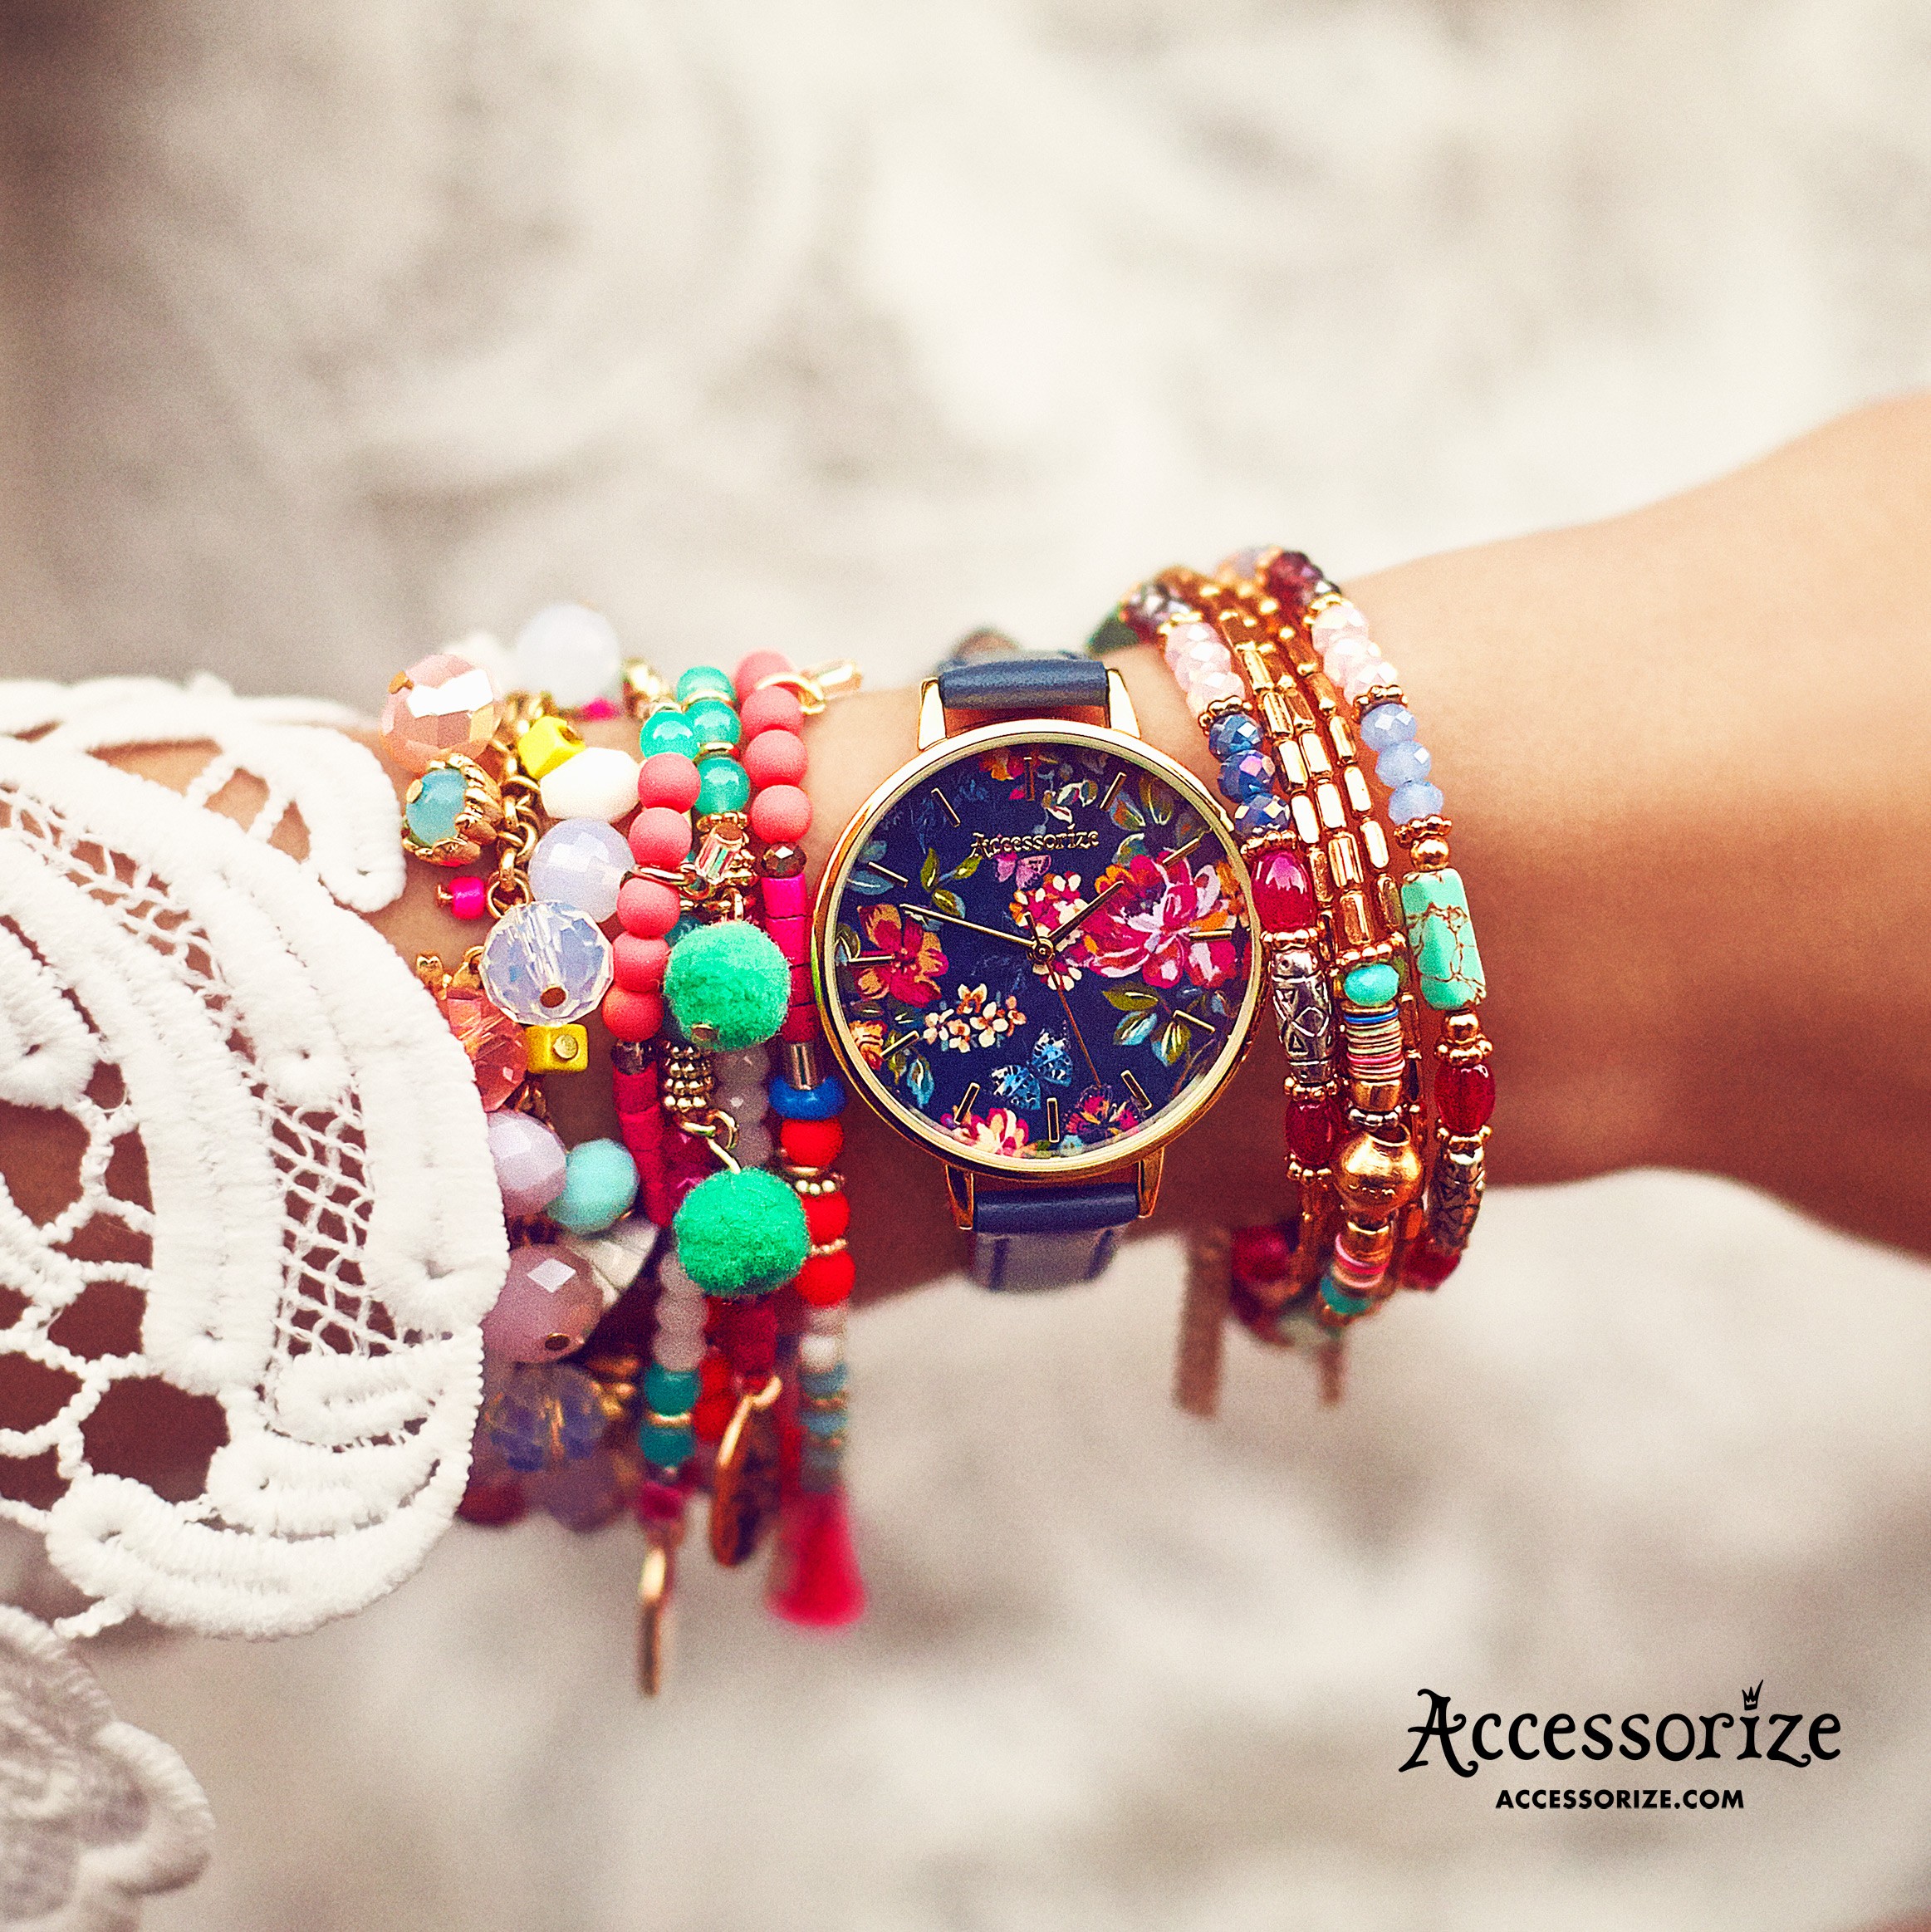 accessorize-campaign-shoes-still-life-watches-sunshine-summer-ruth-rose-6